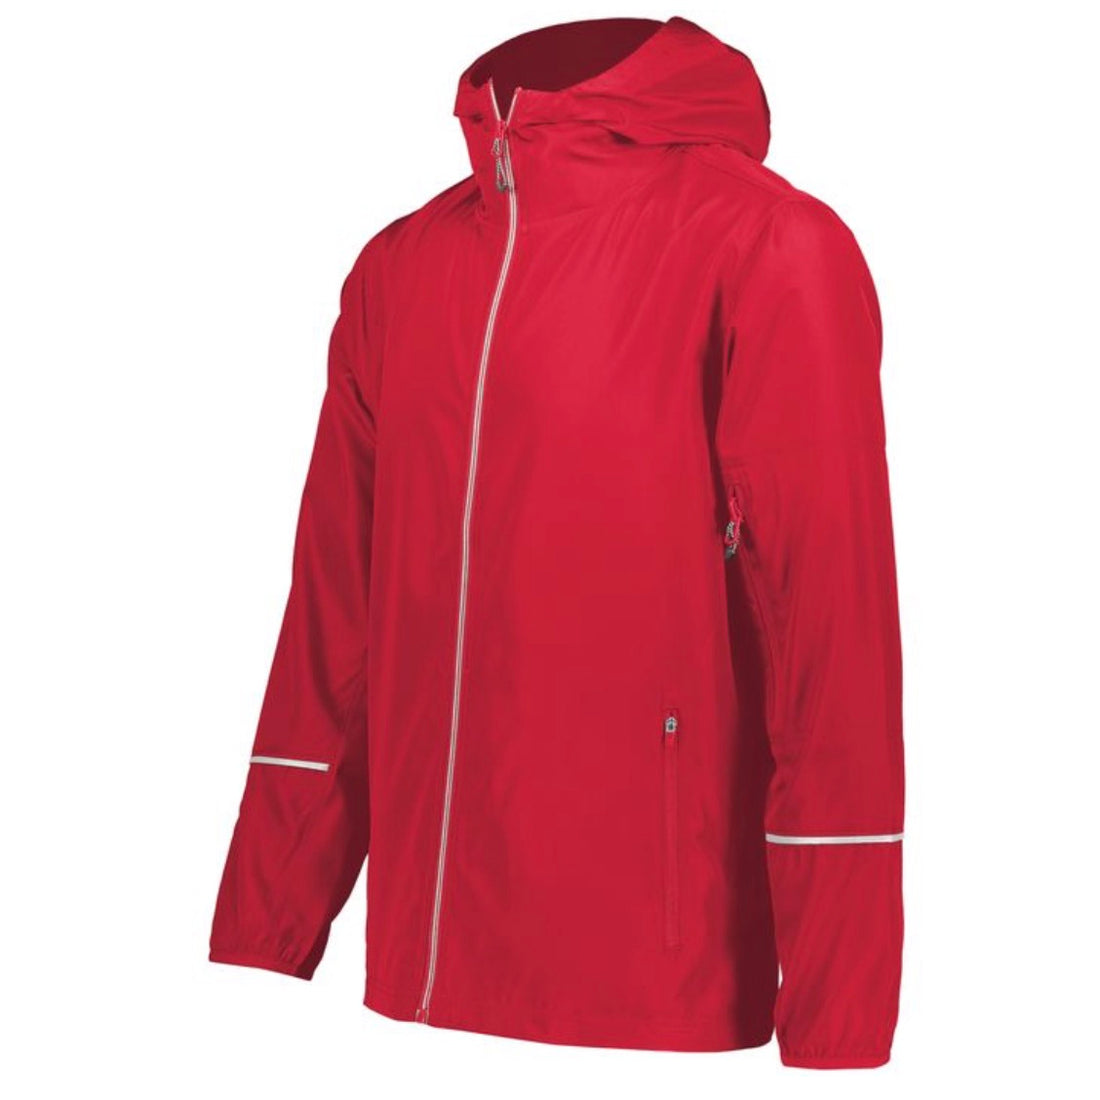 Holloway Packable Full-Zip Jacket (Adult Large)